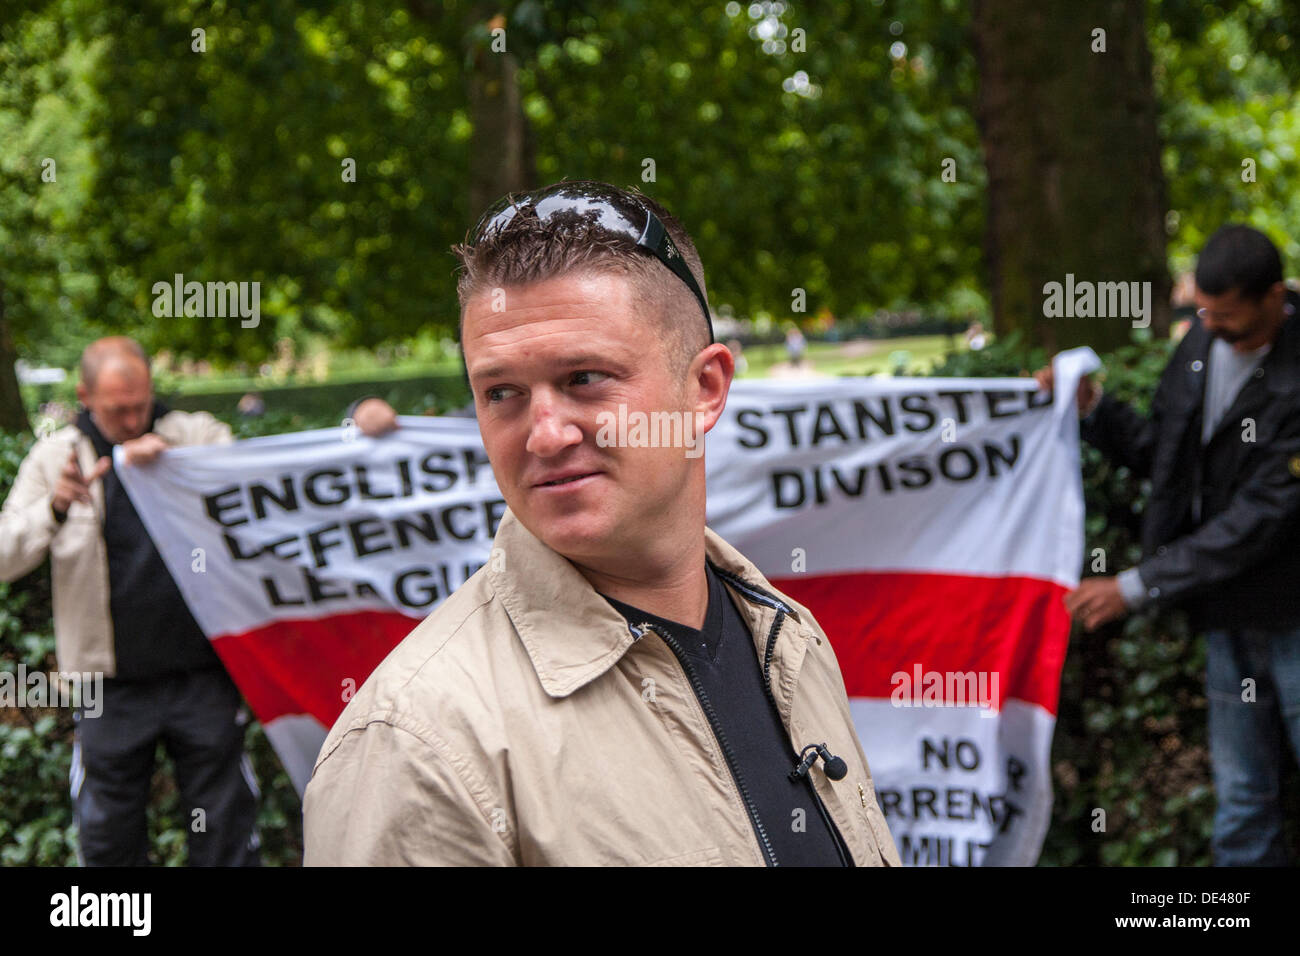 Grosvenor Square, London, UK. 11th Sep, 2013. English Defence League leader Tommy Robinson after laying flowers at the 9/11 memorial in Grosvenor Square, London on the anniversary of the terrorist attacks on America. Credit:  Paul Davey/Alamy Live News Stock Photo